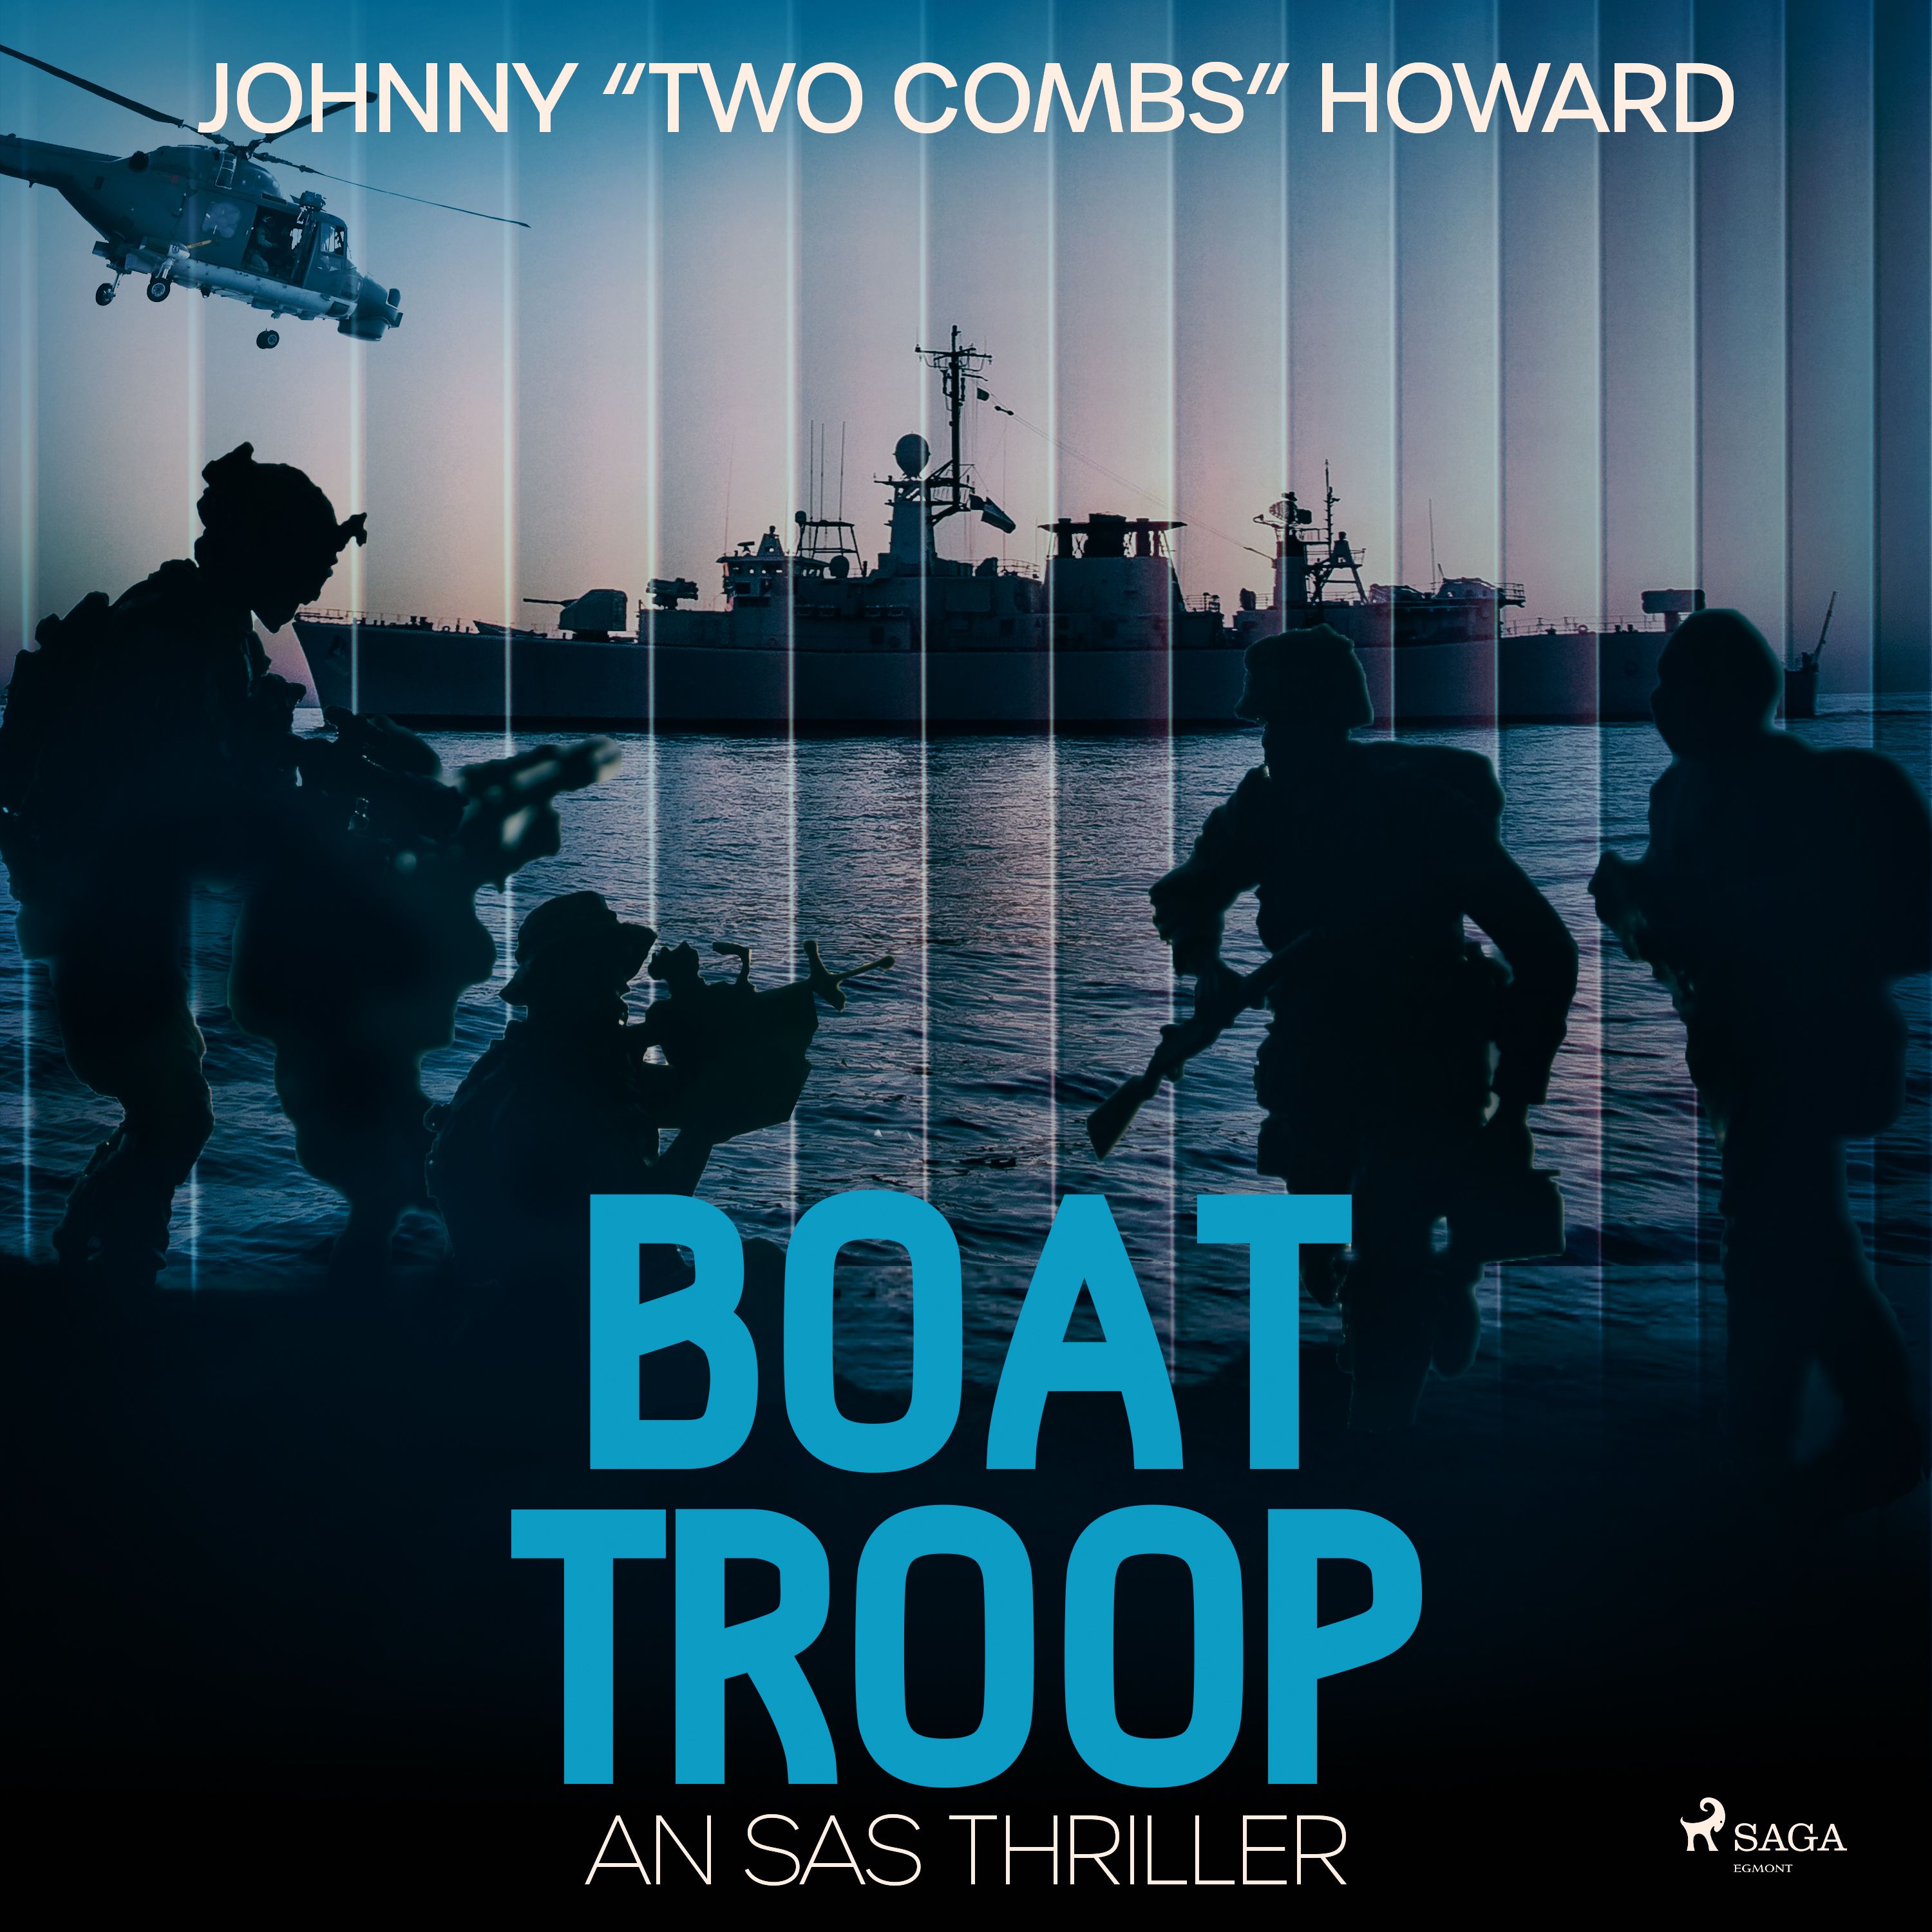 Boat Troop: An SAS Thriller, audiobook by Johnny Two Combs Howard